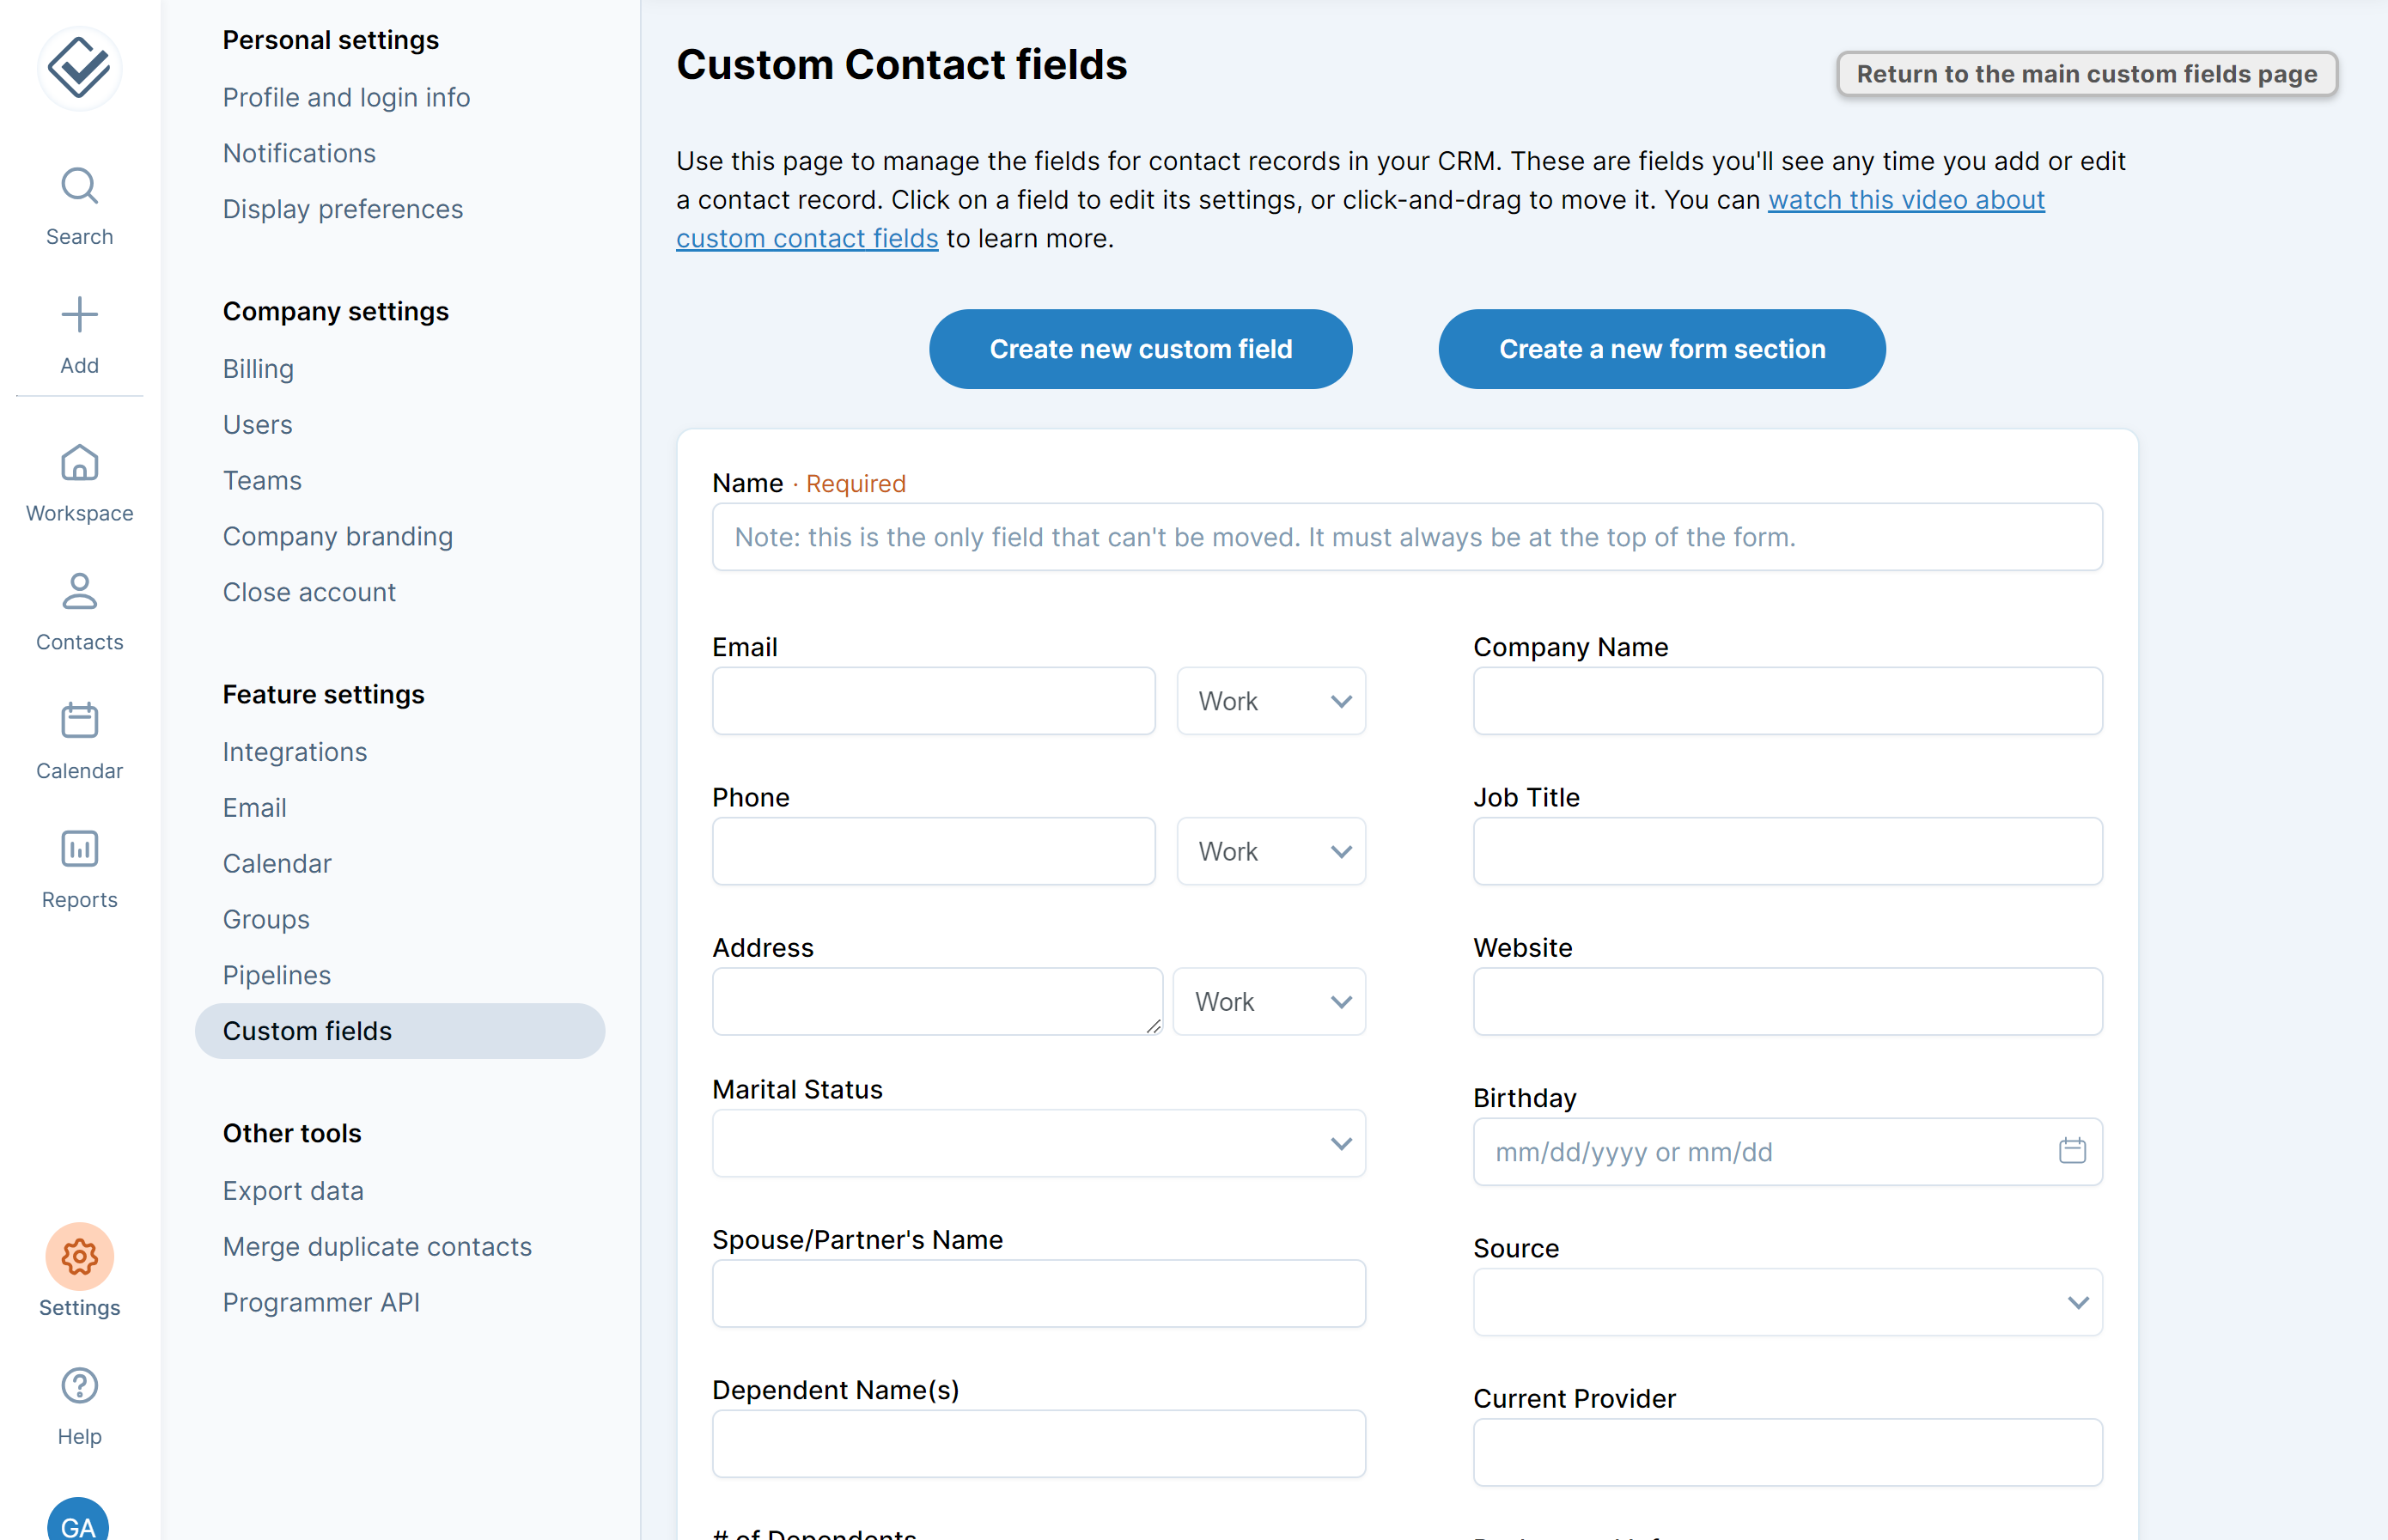 Less Annoying CRM Software - Custom fields - create unlimited custom fields to store all the information you need to stay on top of for every contact or company.